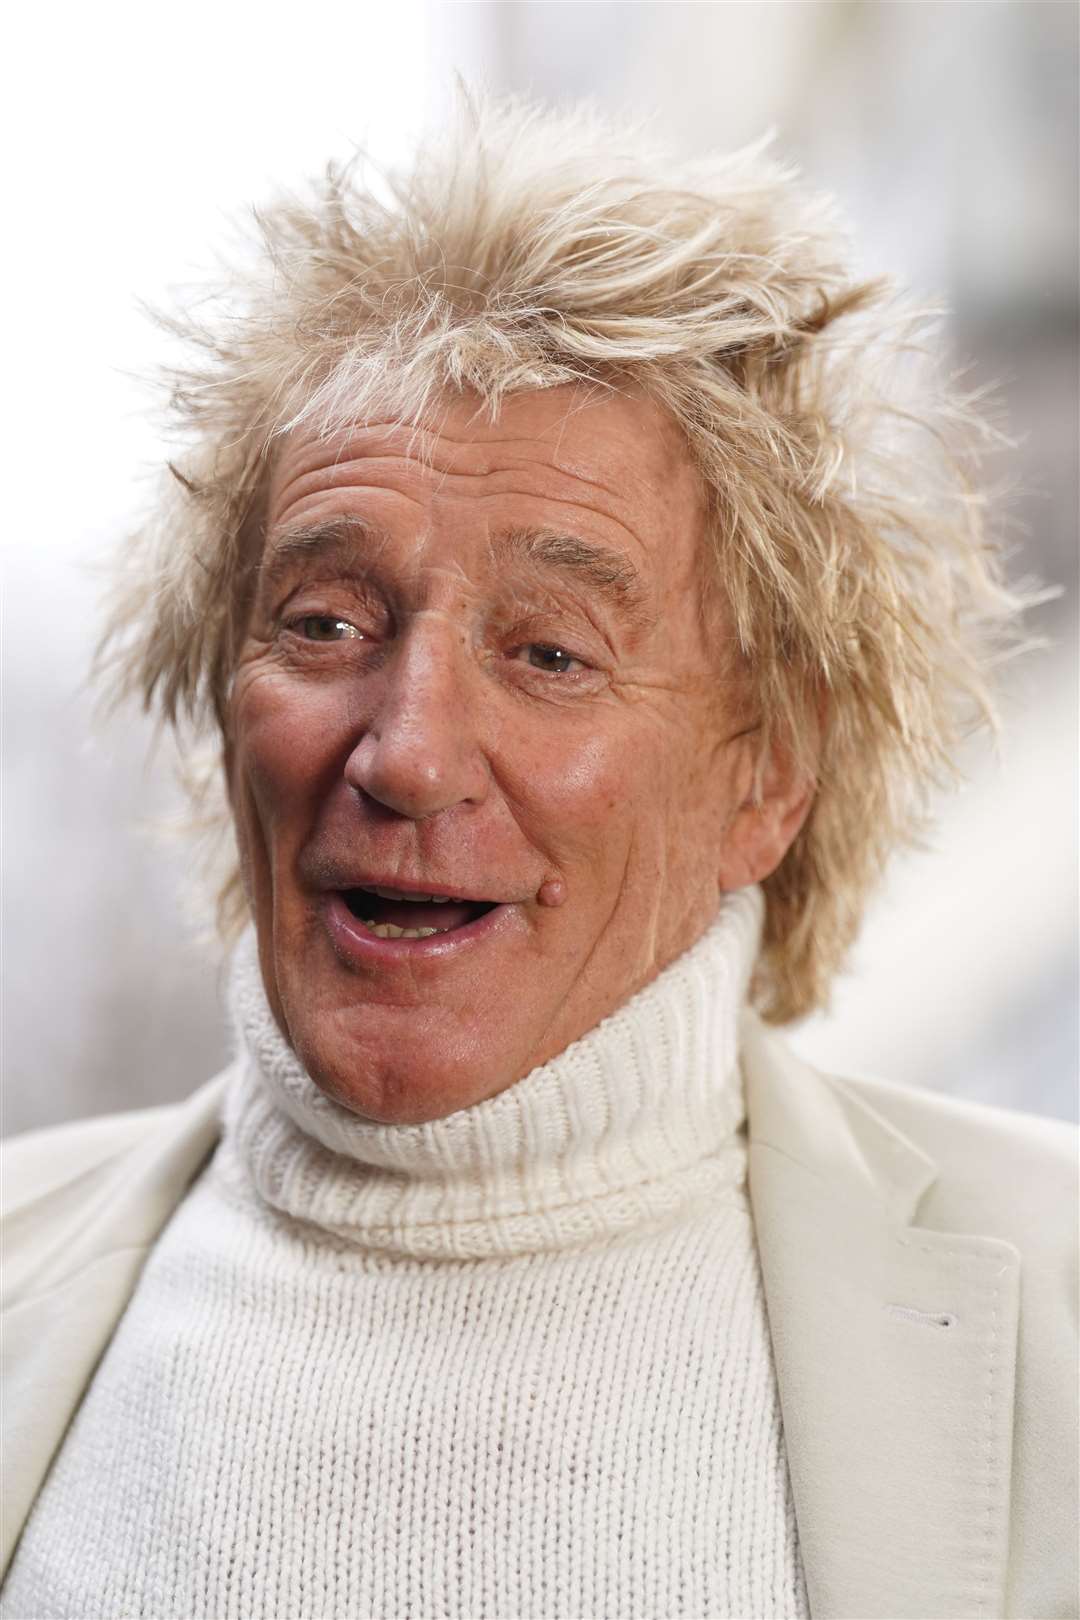 Sir Rod during a visit to the hospital in Harlow (Joe Giddens/PA)